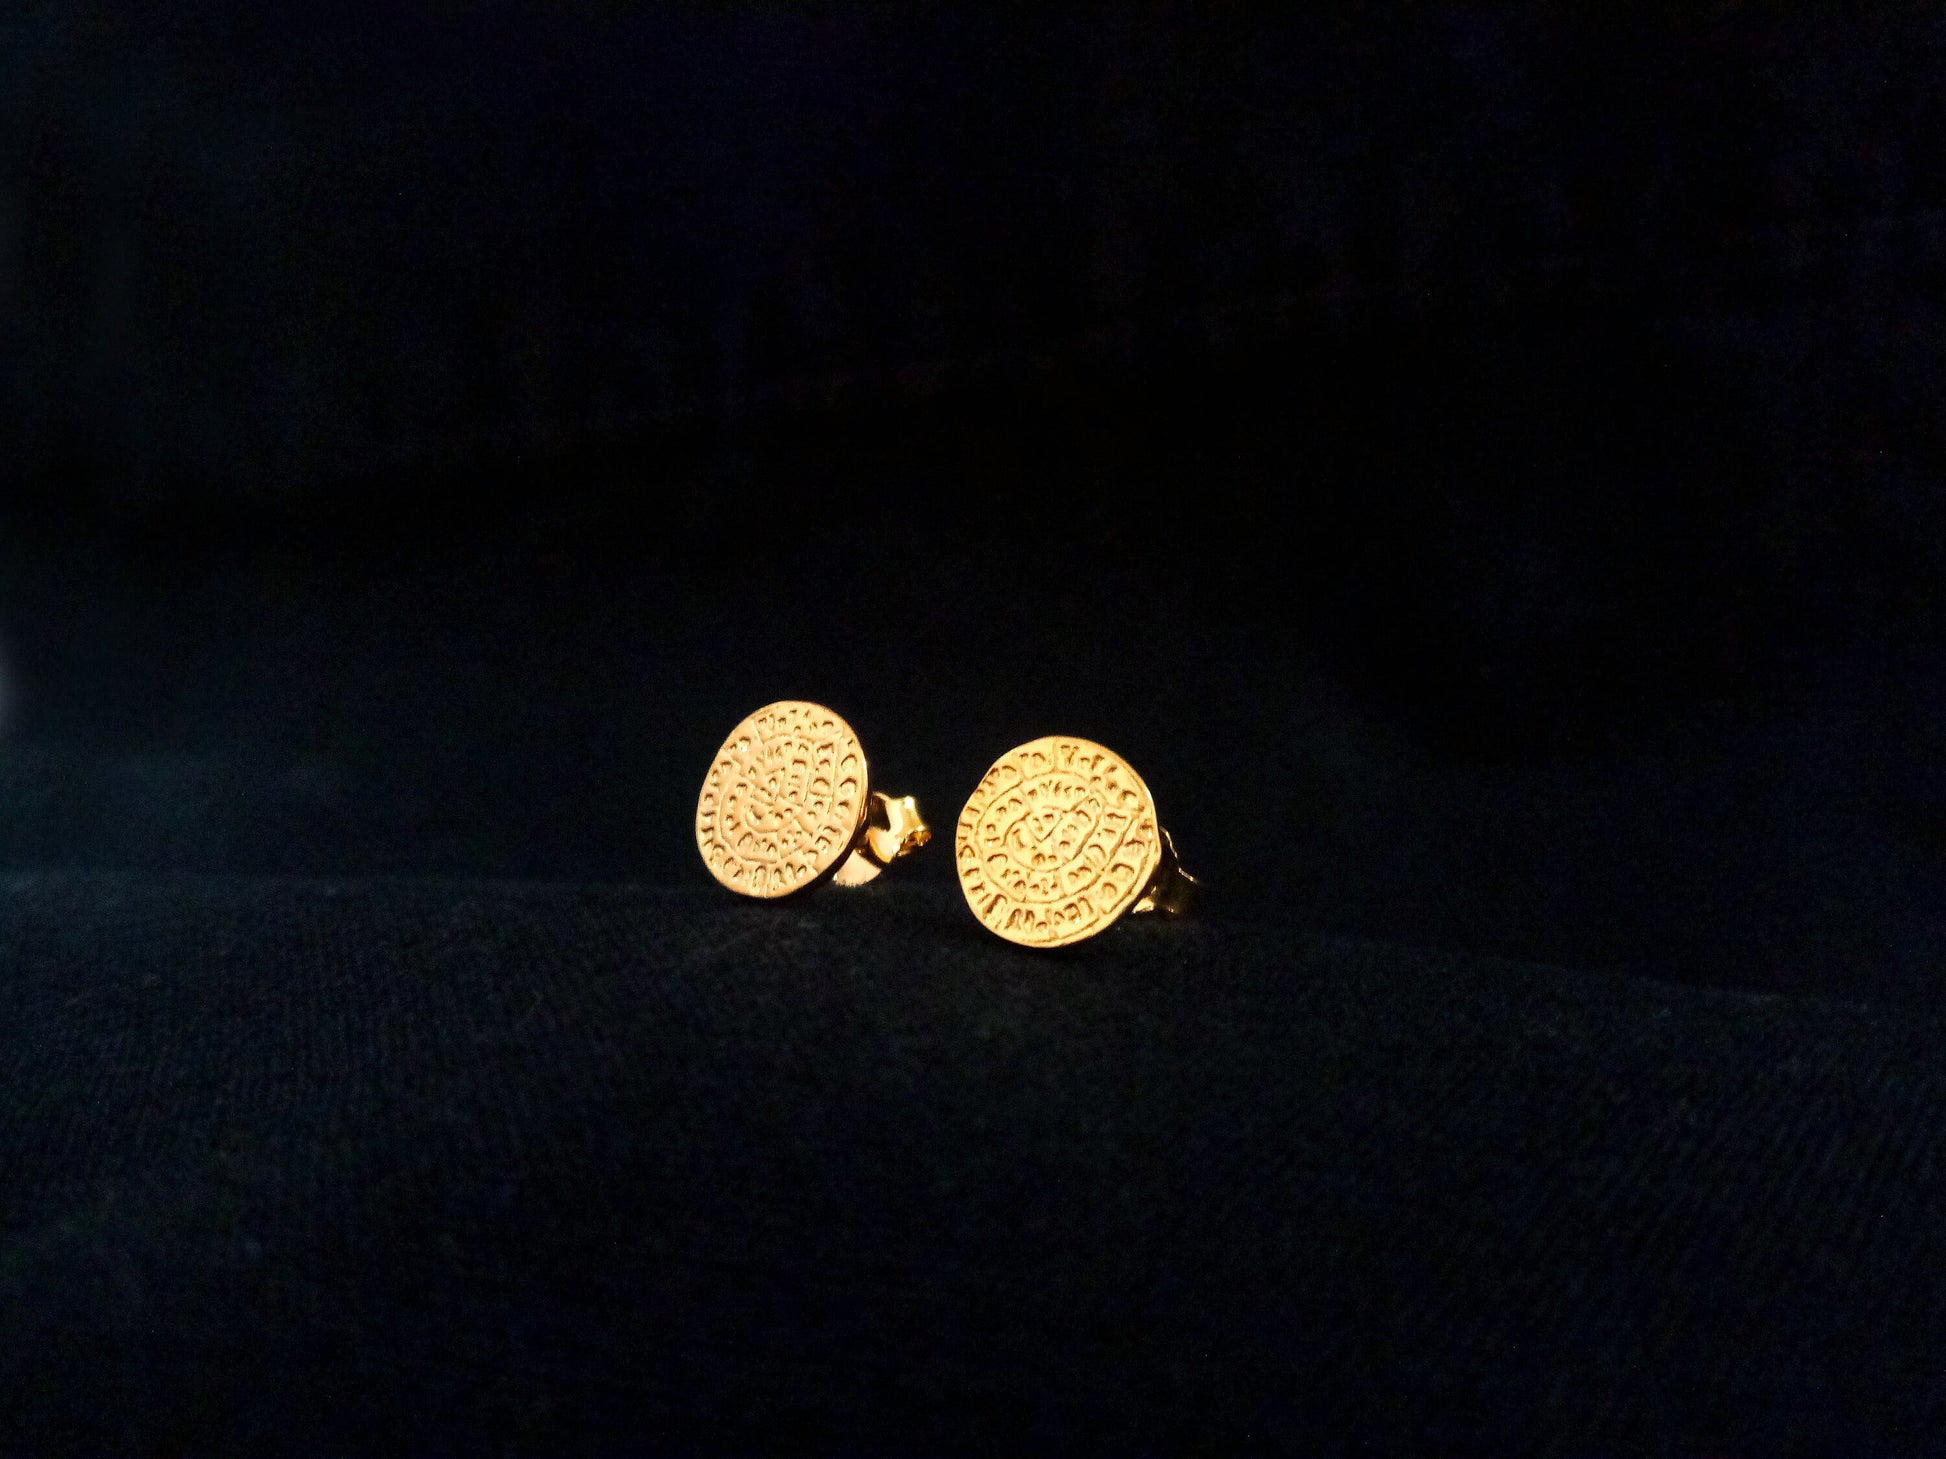 Sale 15% and free shipping for Greek silver Phaistos disc stud earrings which are gold plated as well.